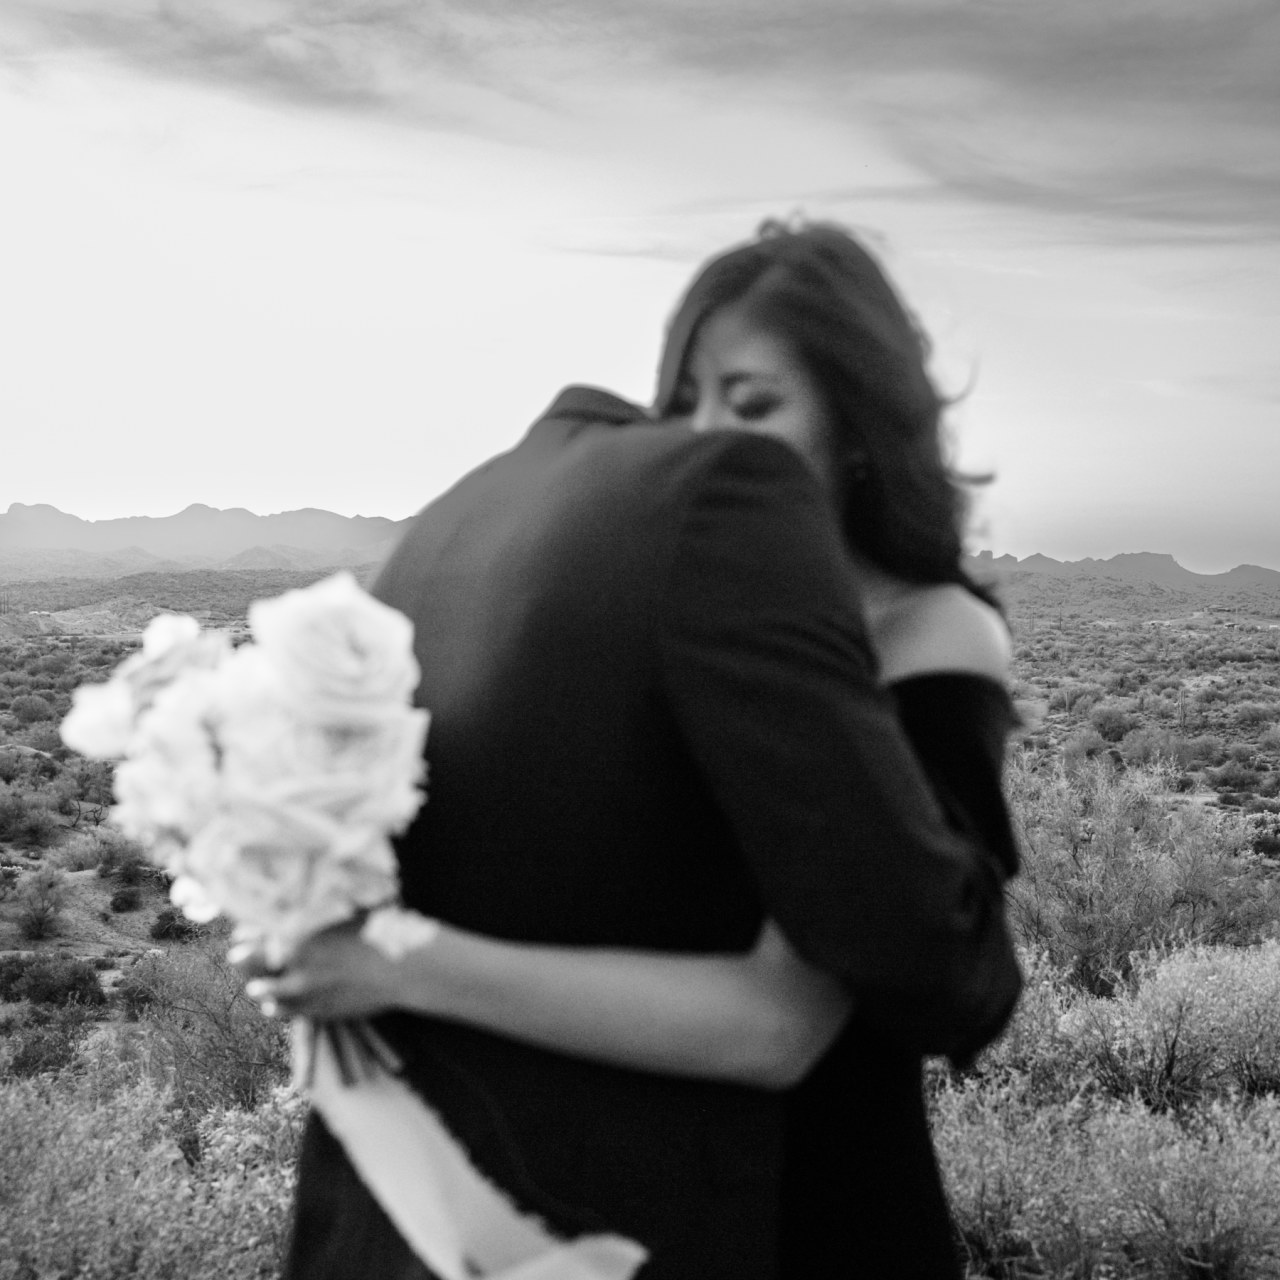 Woman and man hugging in desert landscape with woman holding bouquet.